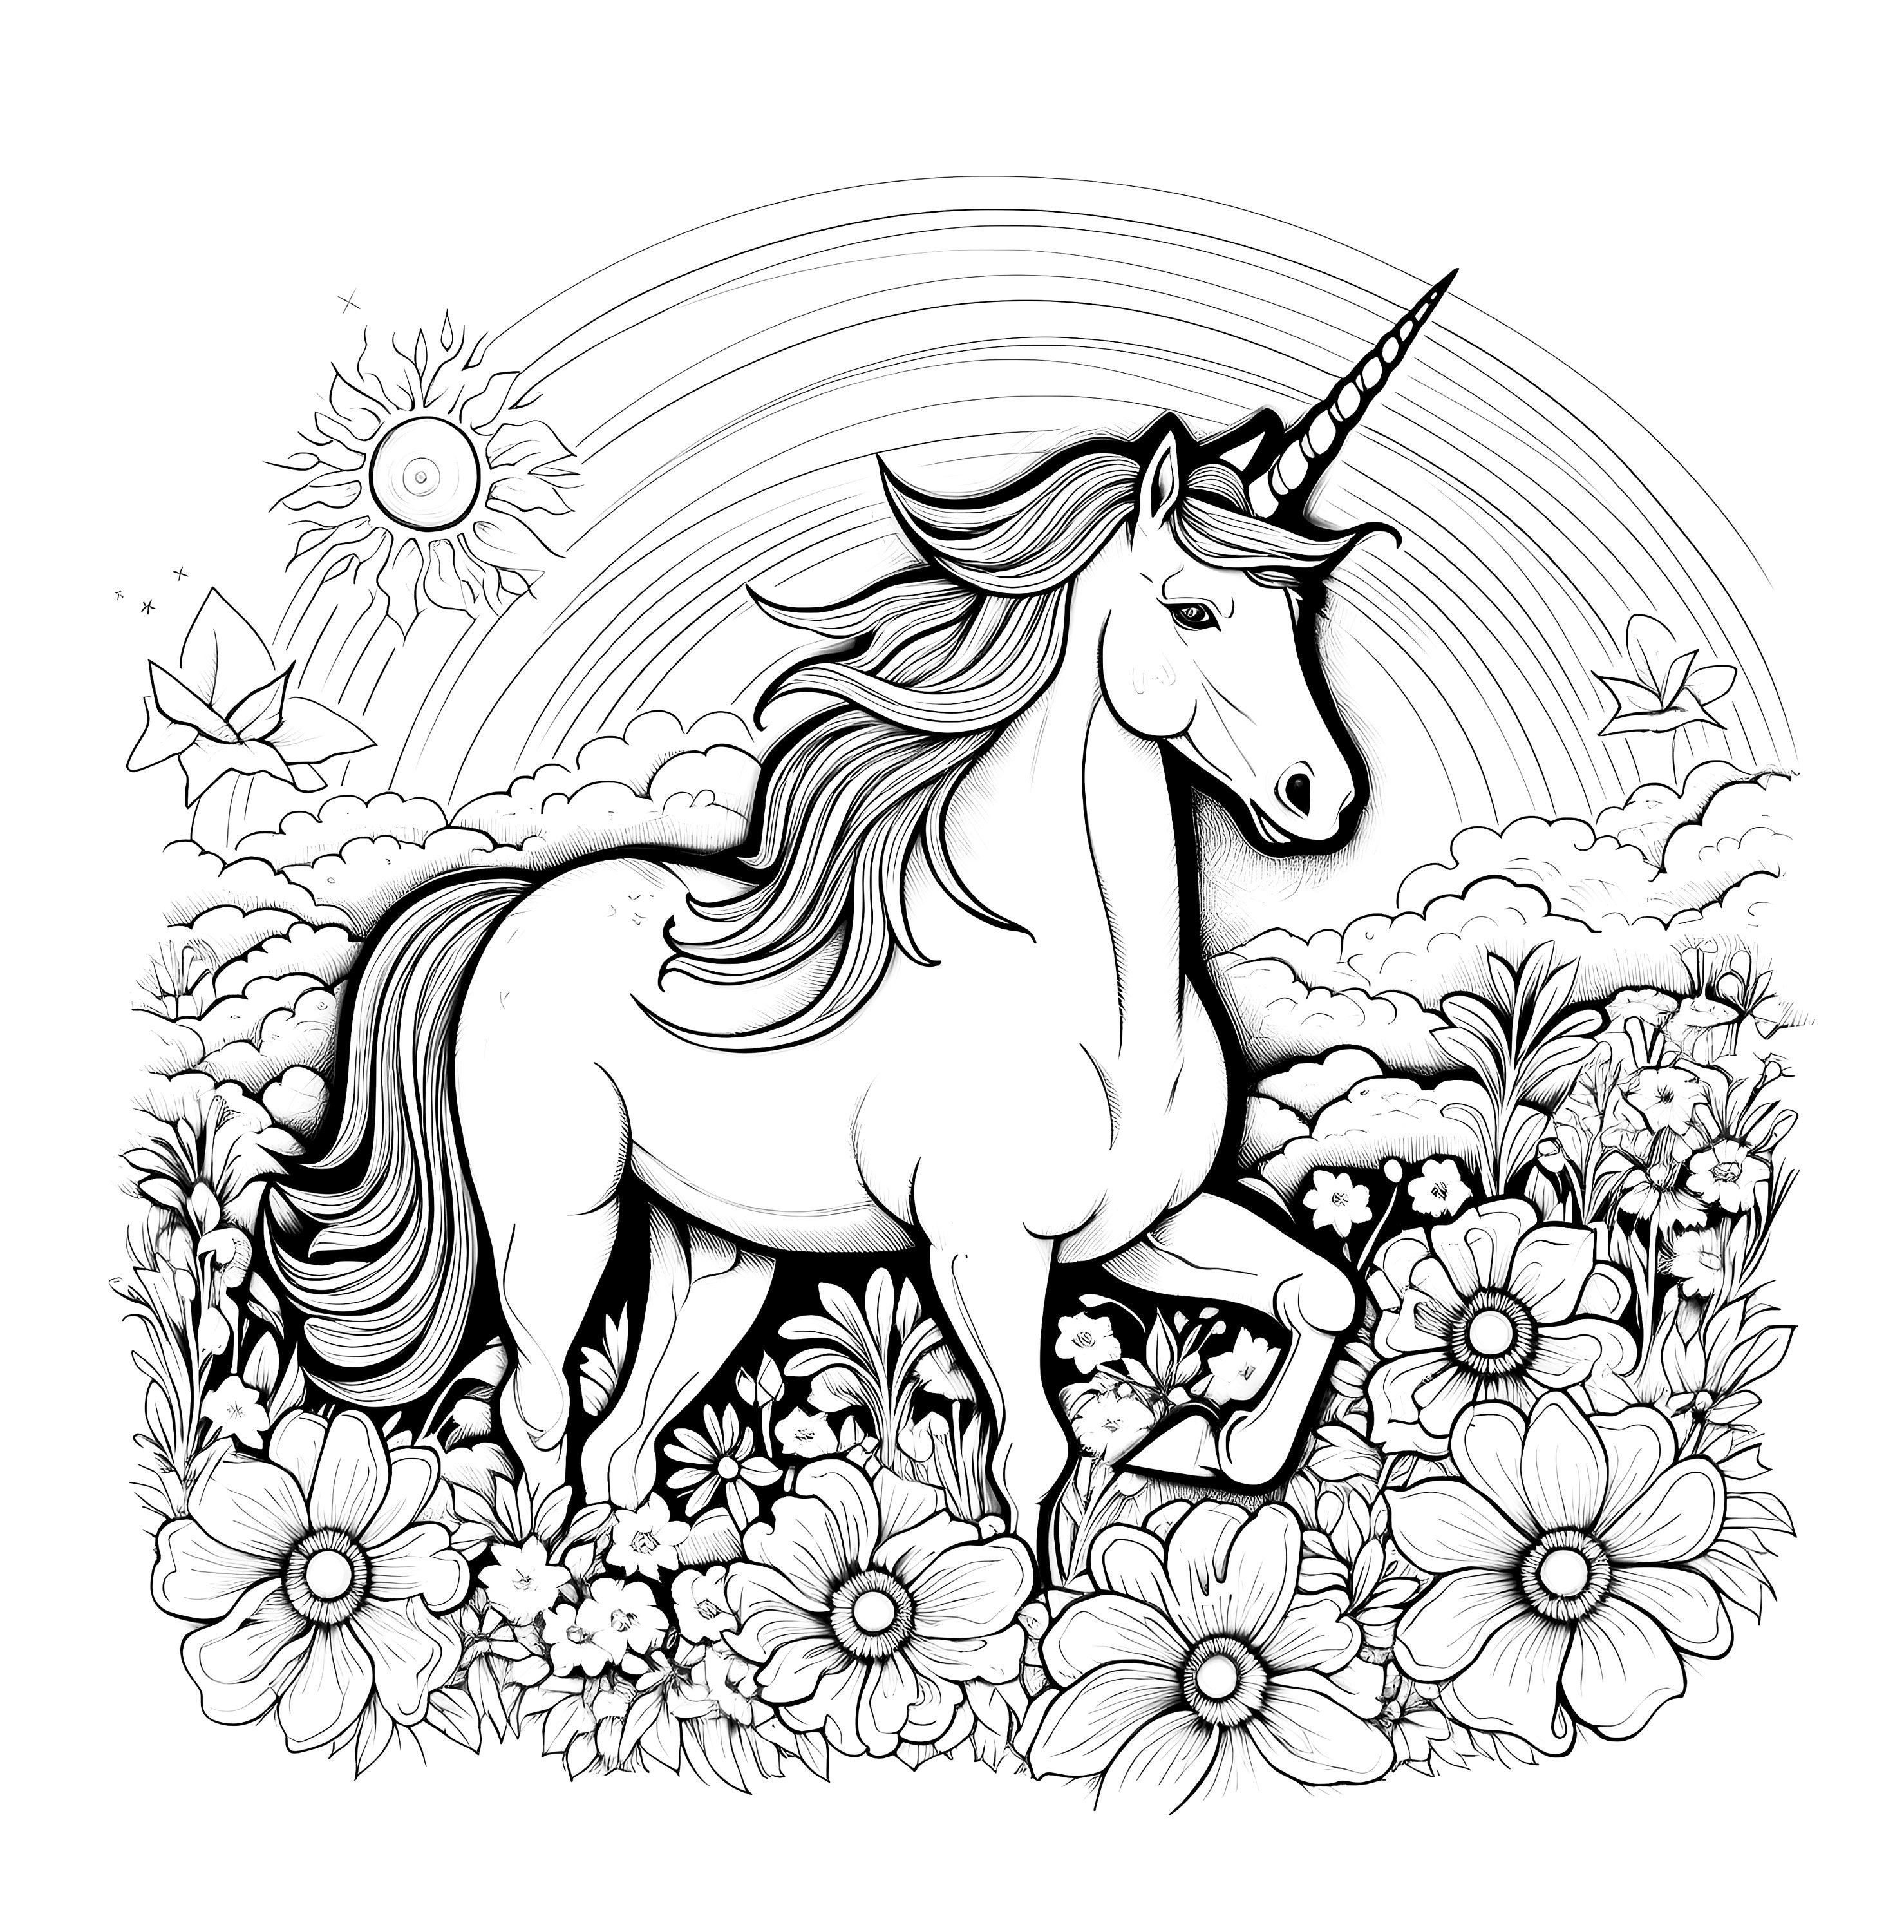 50 Unicorns Coloring Pages Instant Download. Cute Unicorn - Etsy